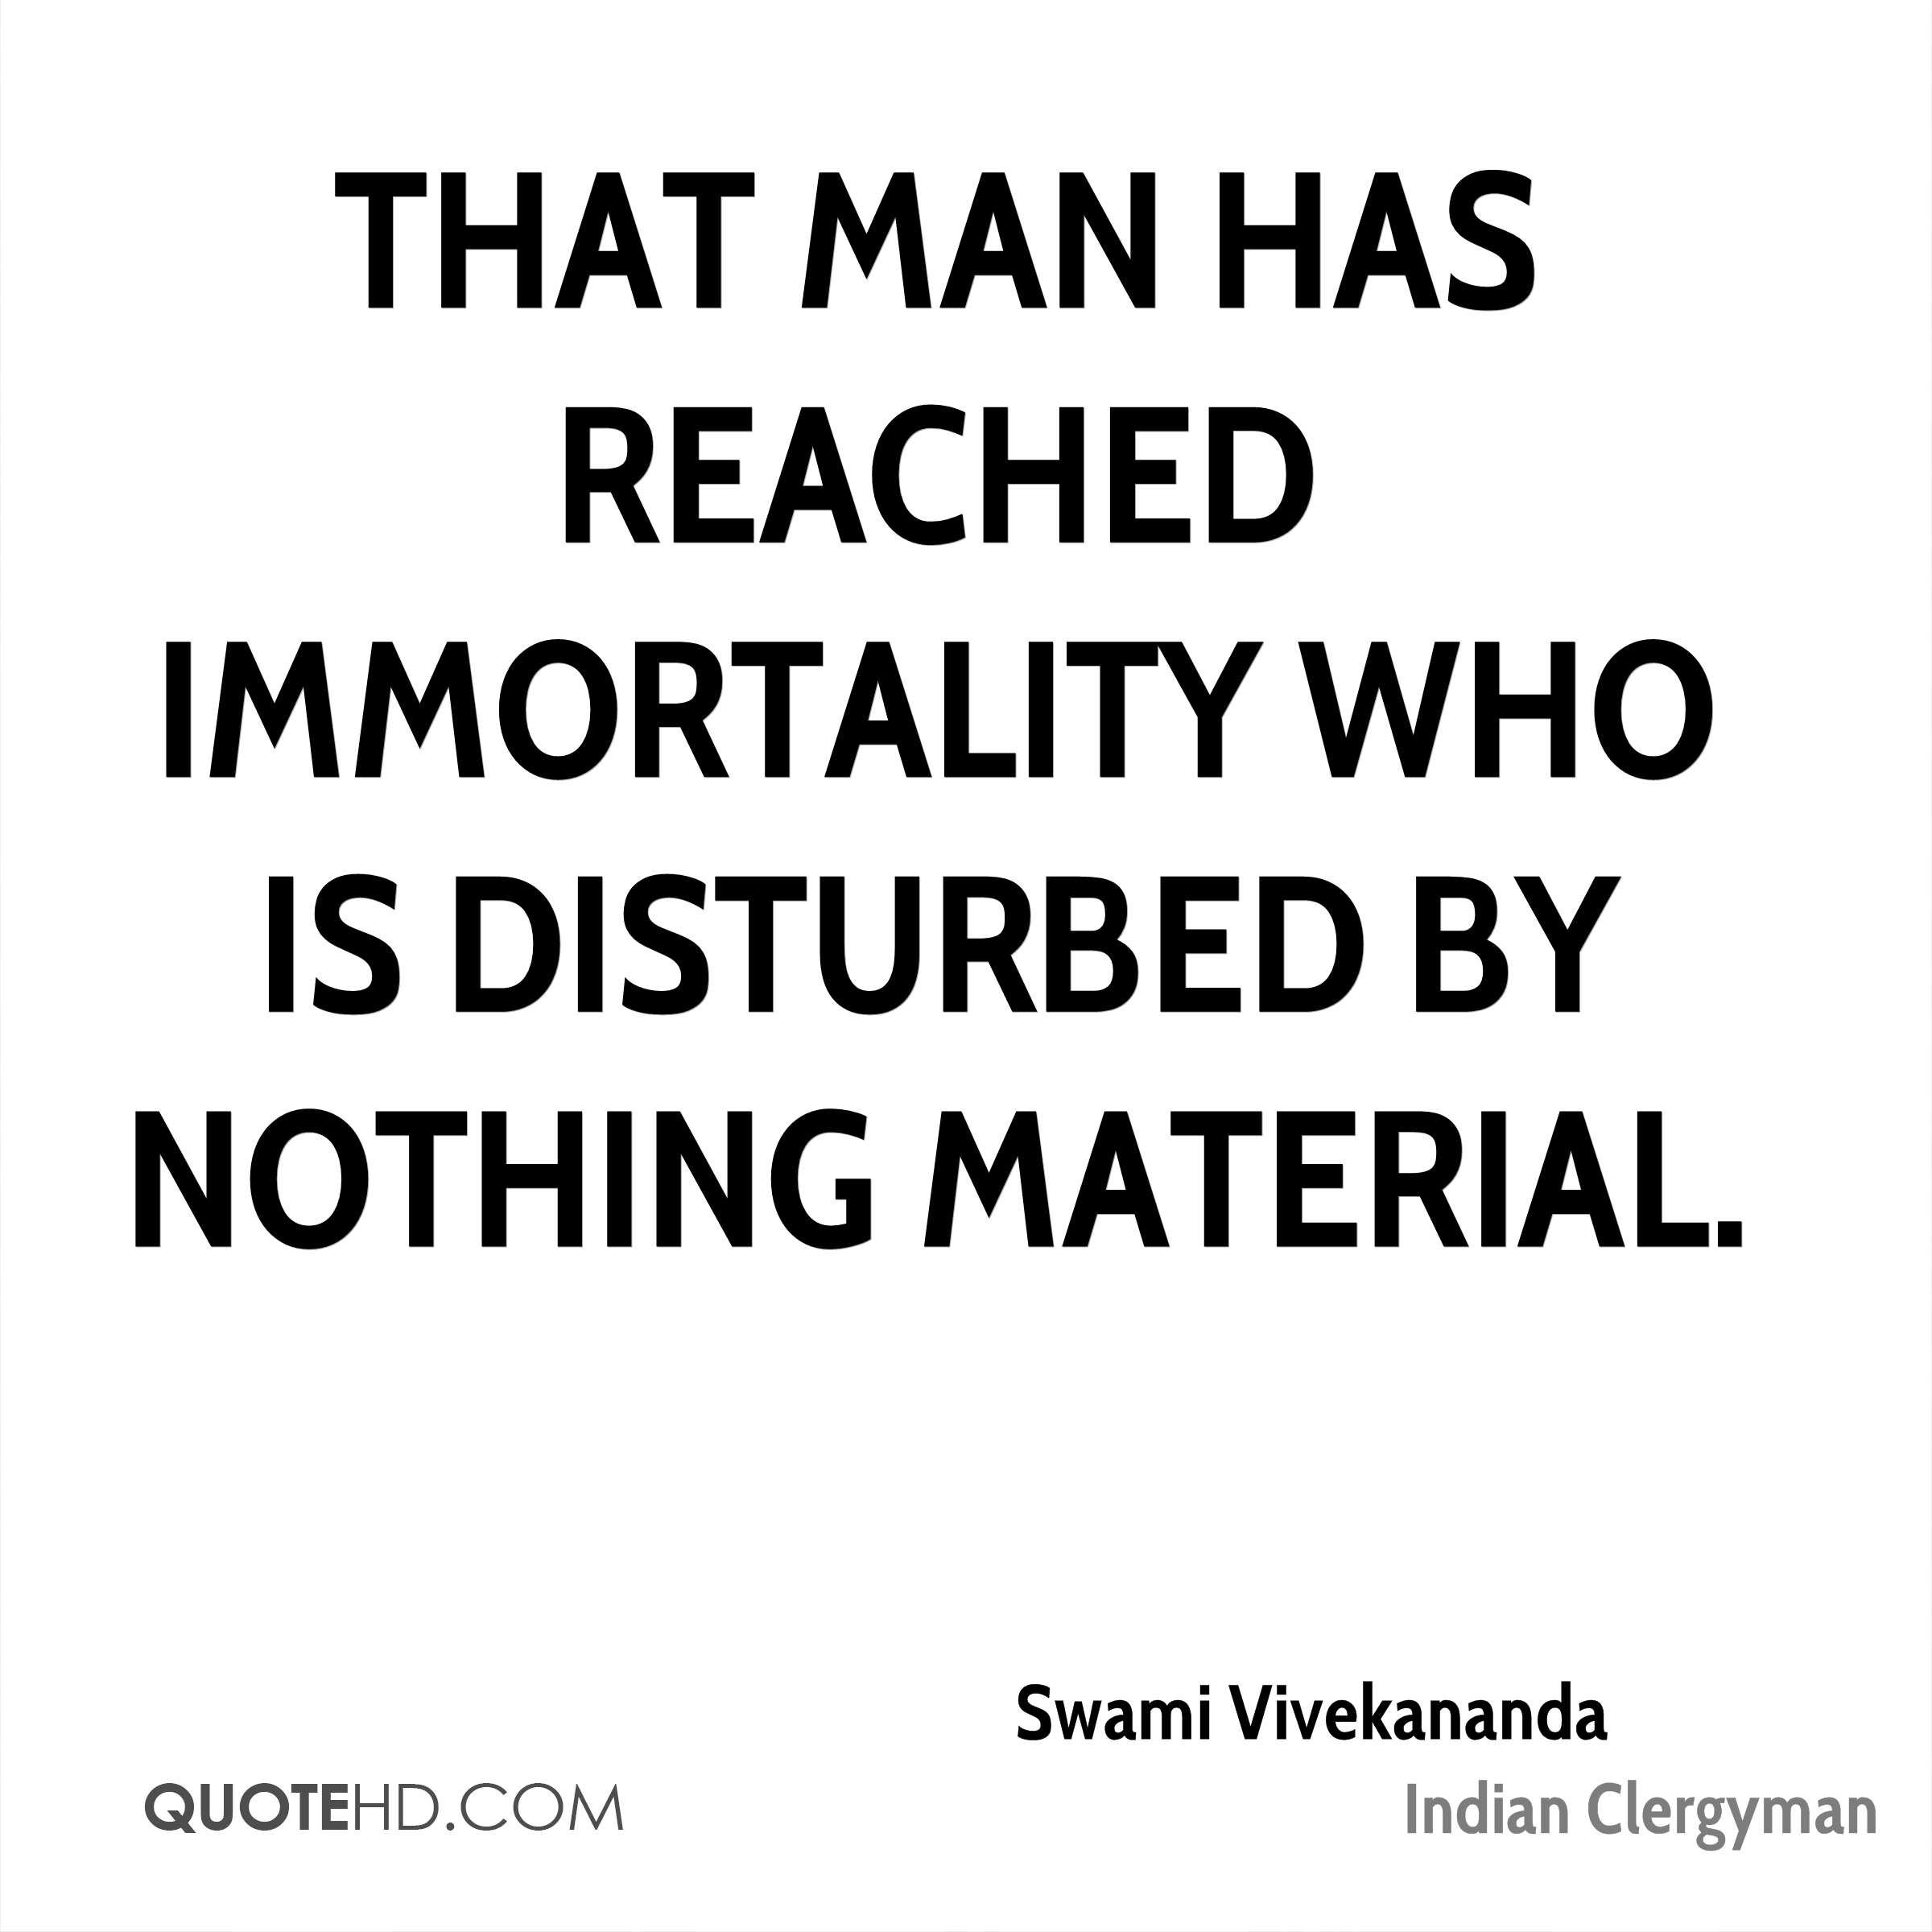 That man has reached immortality who is disturbed by nothing material. Swami Vivekananda